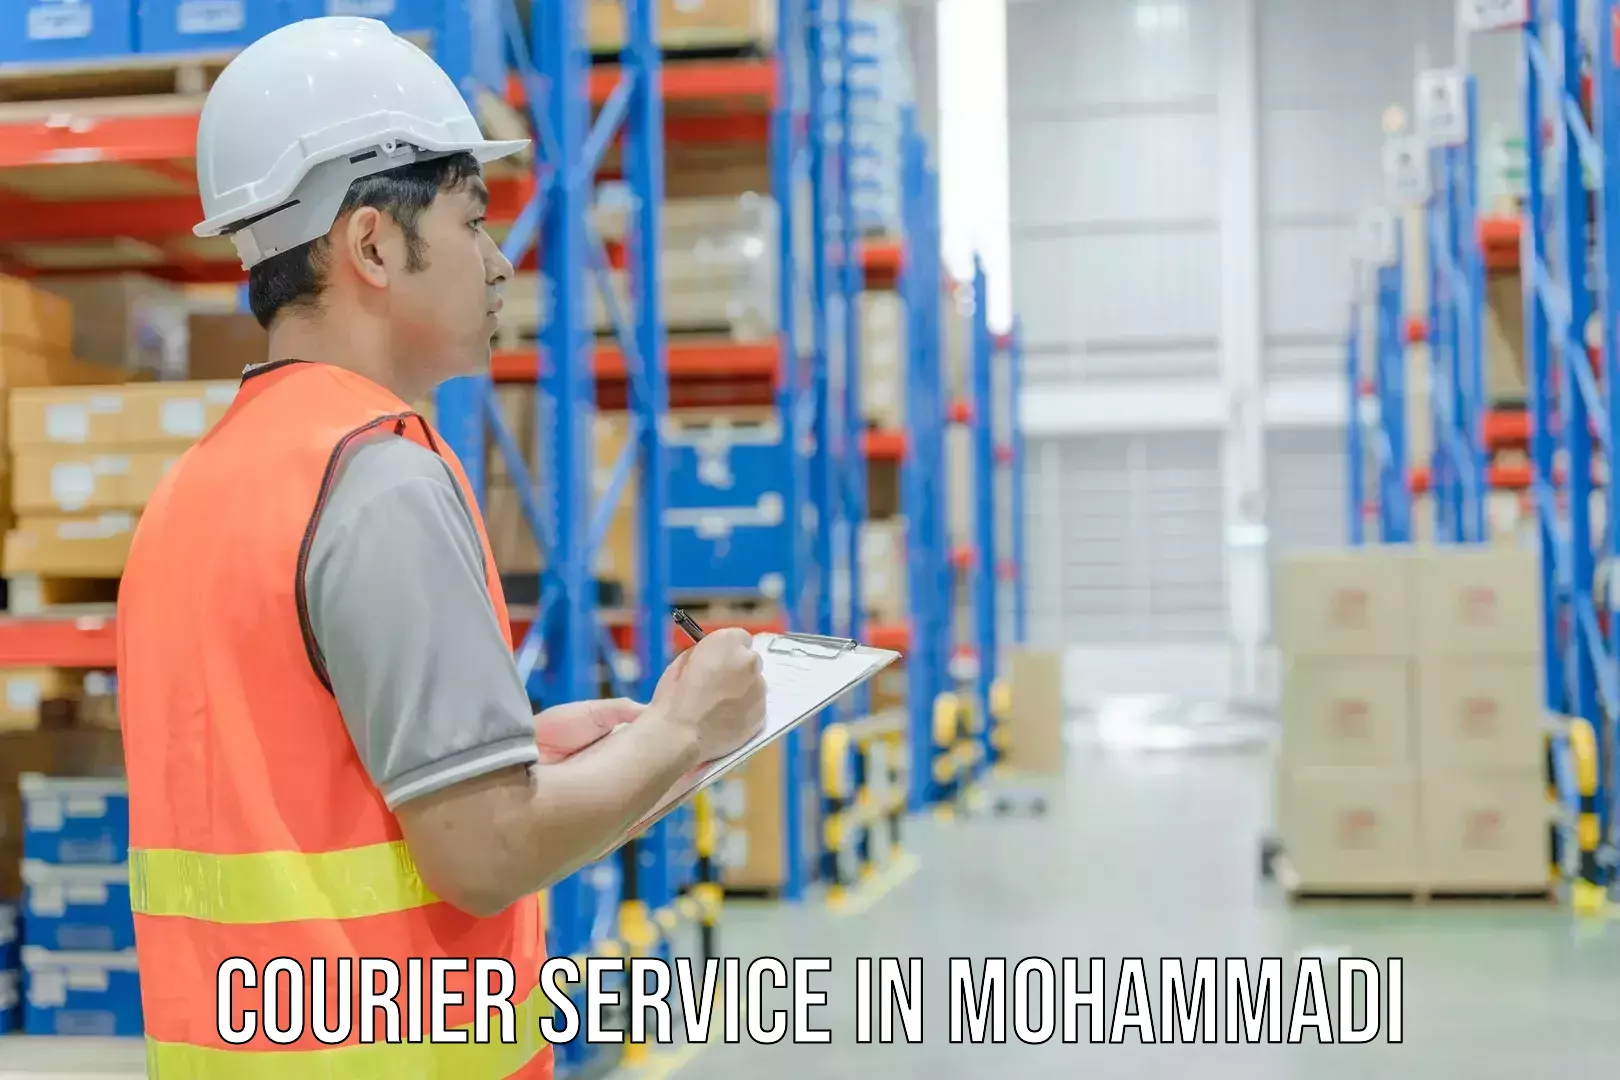 Express courier facilities in Mohammadi